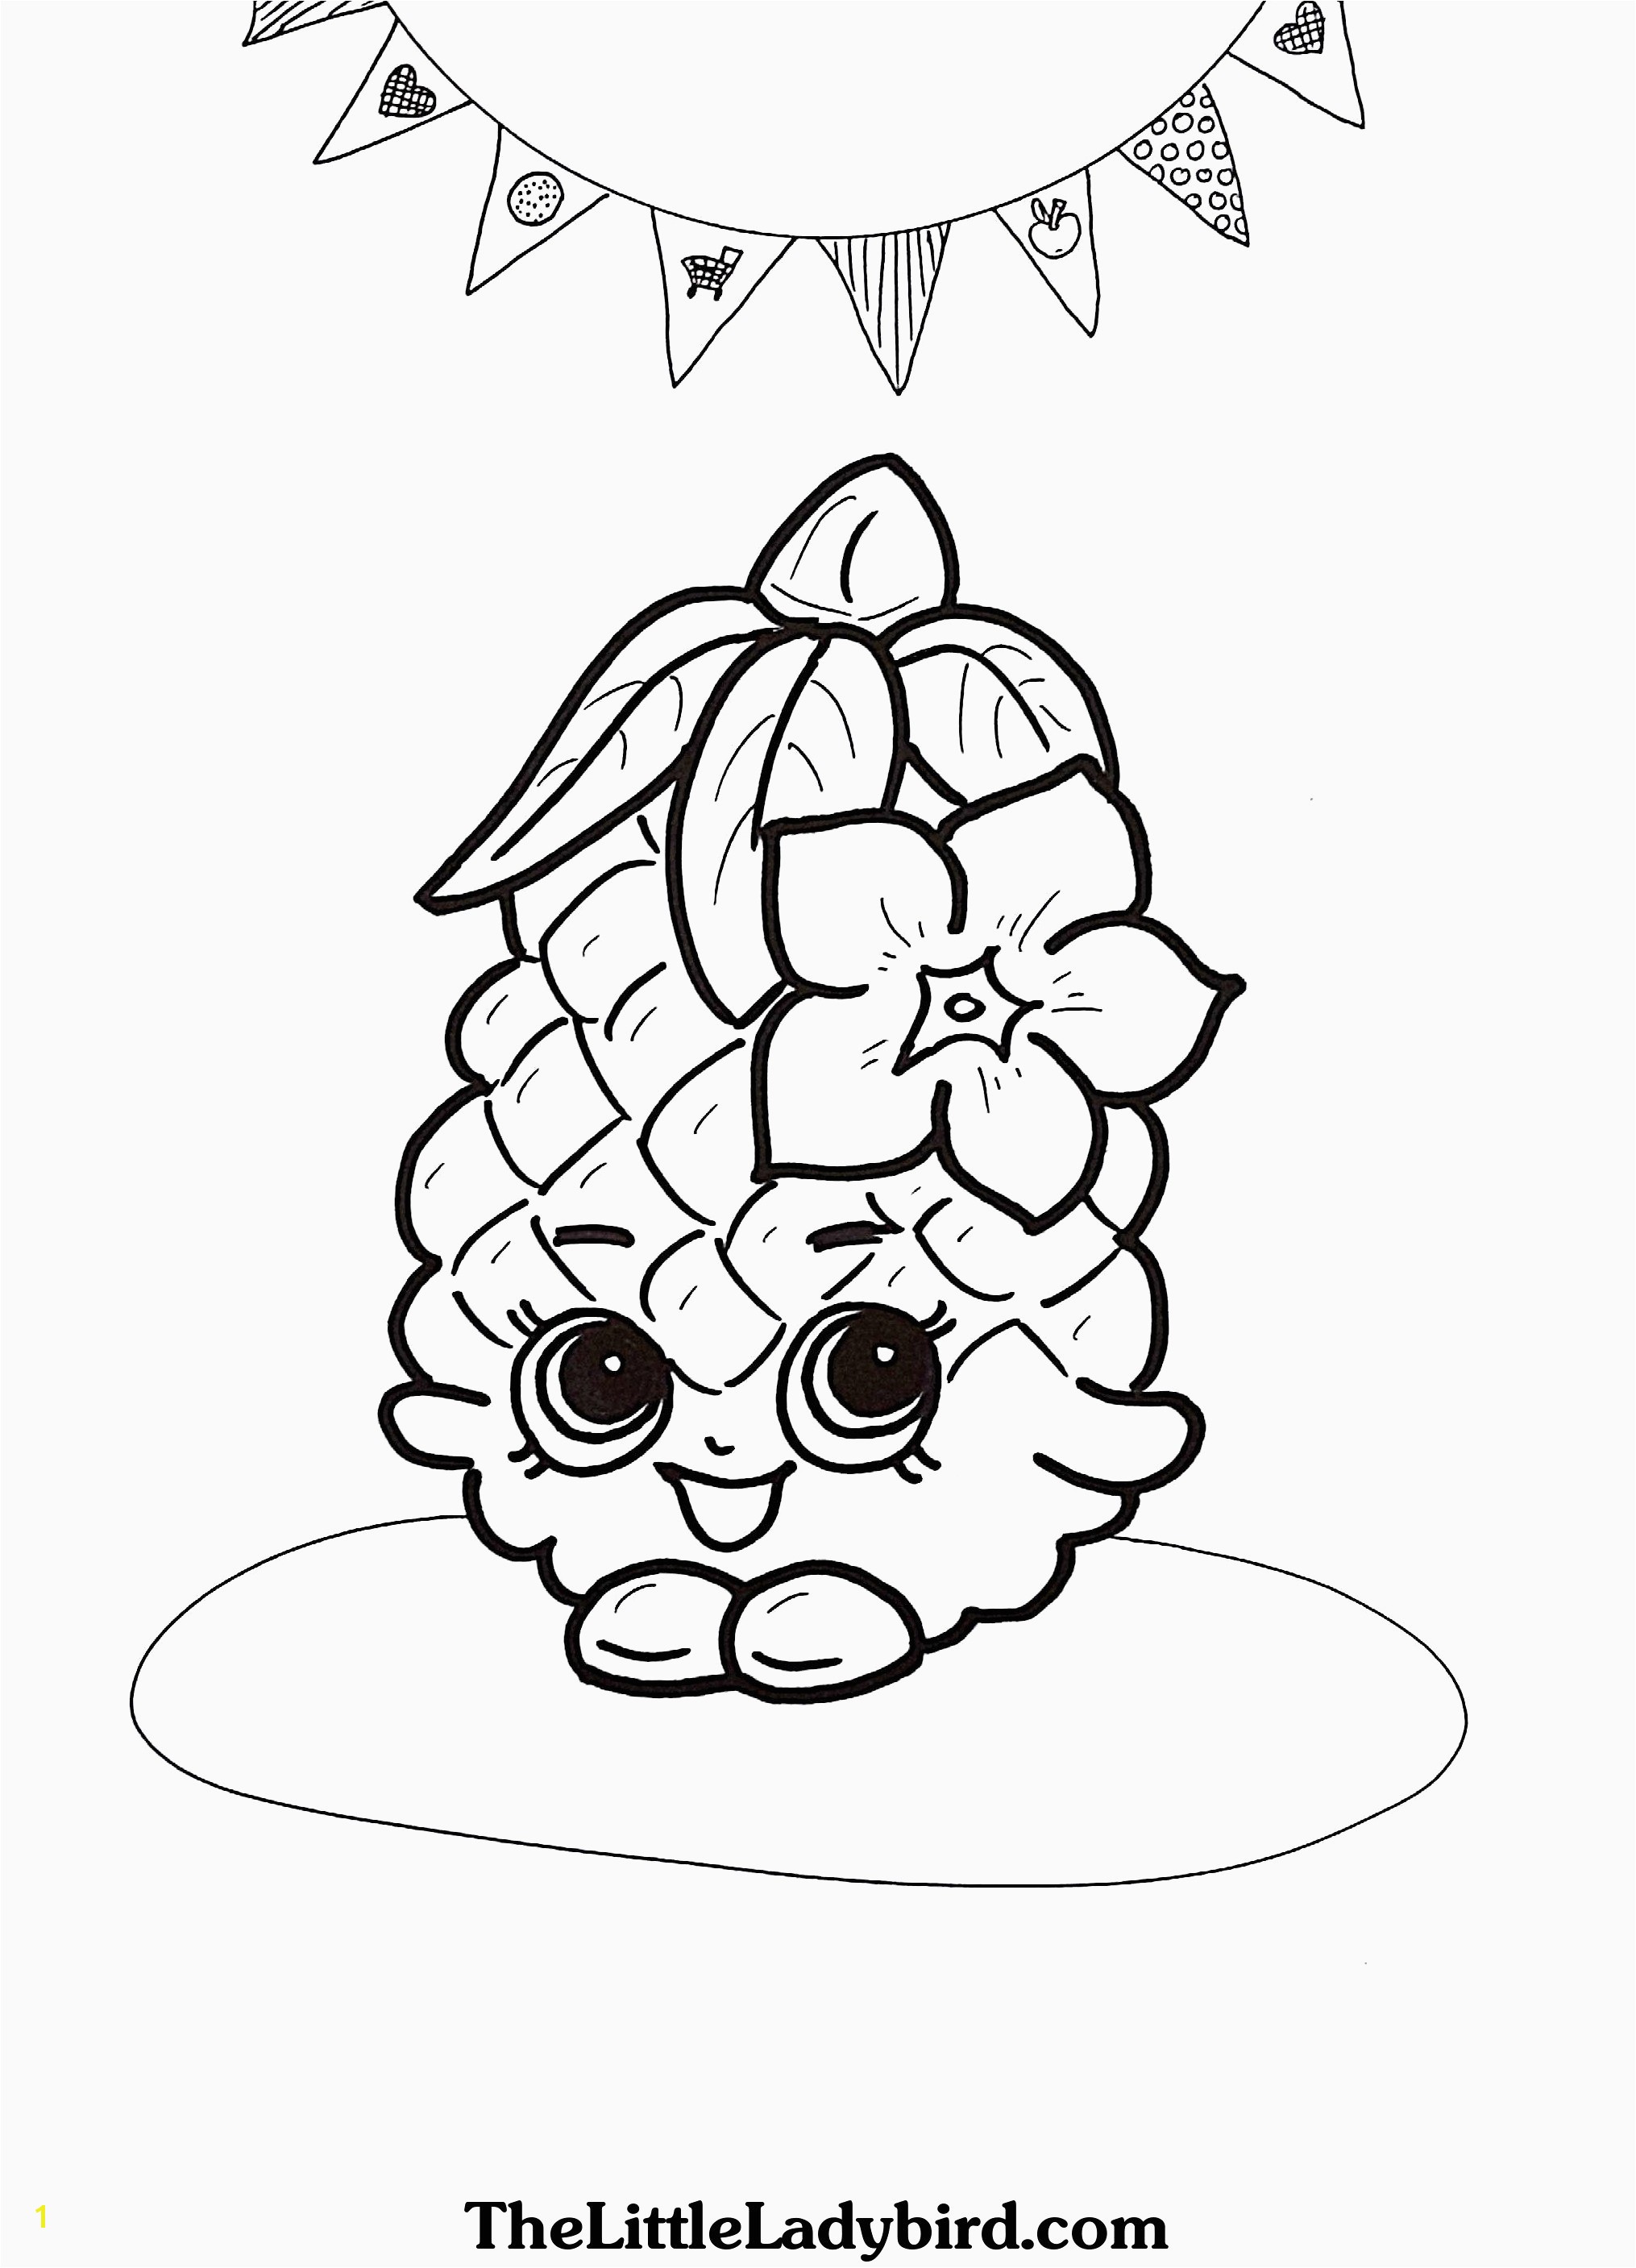 Coloring Book Pages Of Babies Baby Coloring Pages New Baby Coloring Pages New Media Cache Ec0